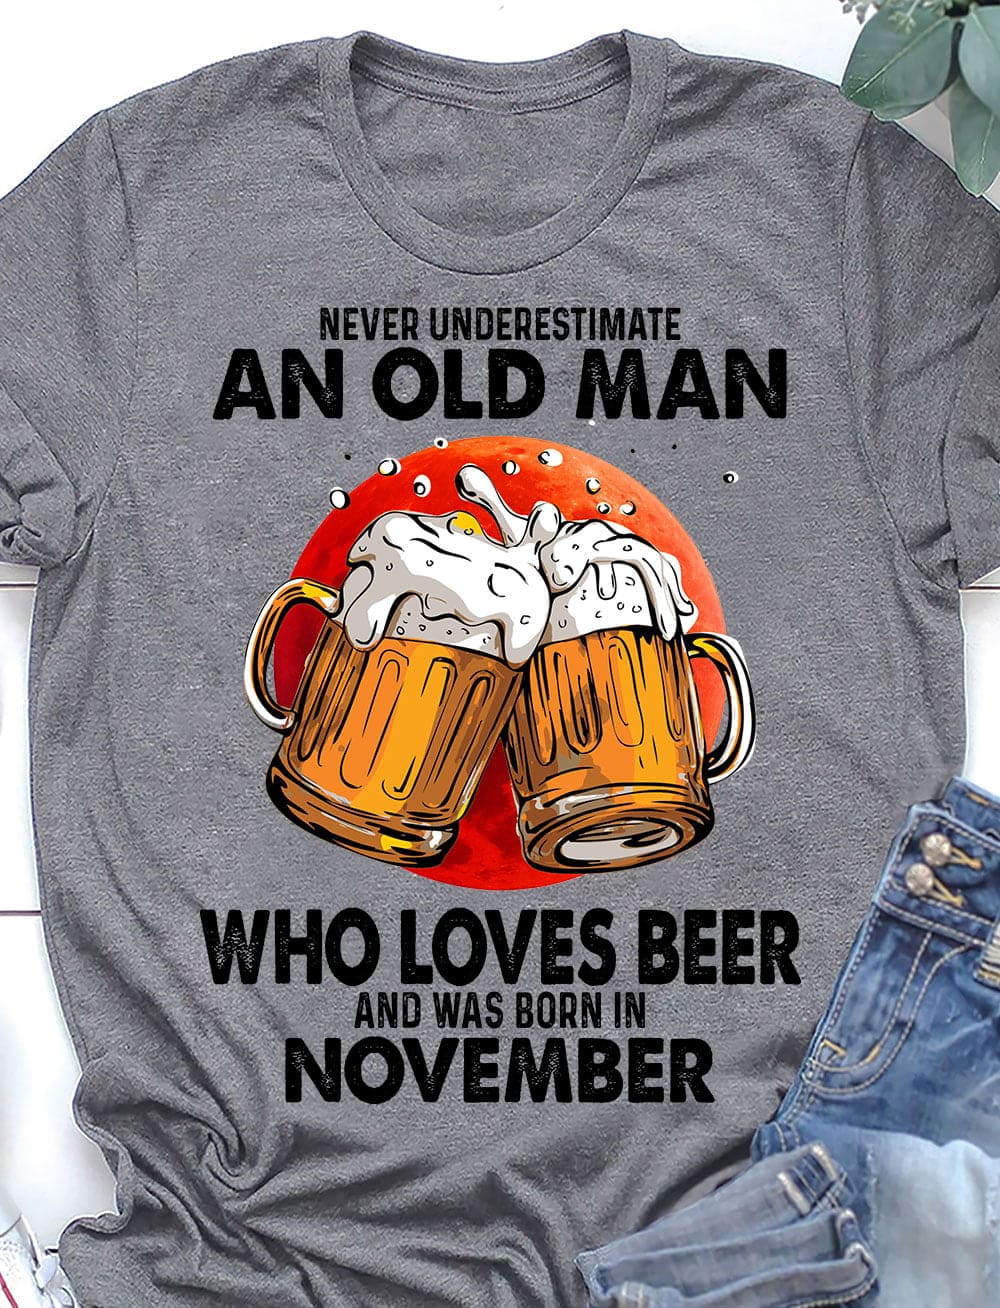 Never underestimate an old man who loves beer and was born in November - November beer drinker